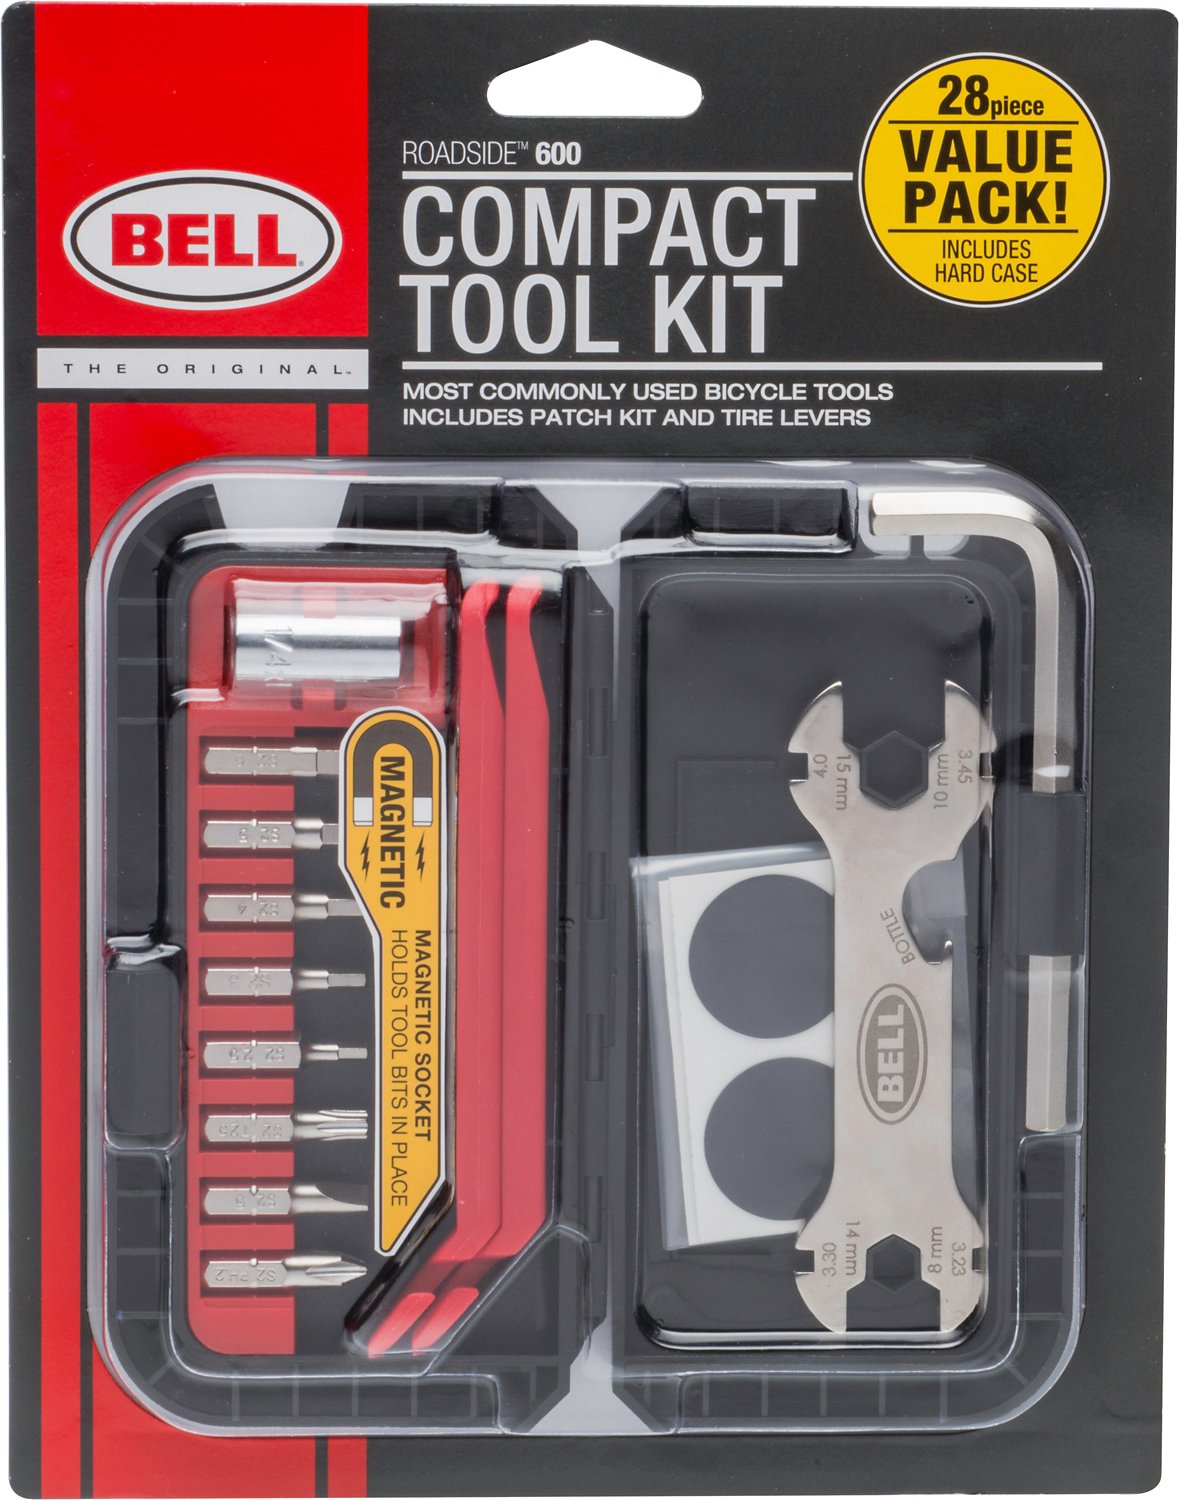 for sale online Bell Sports Roadside 600 Compact Bike 28pc Tool Kit Rugged Hard Case